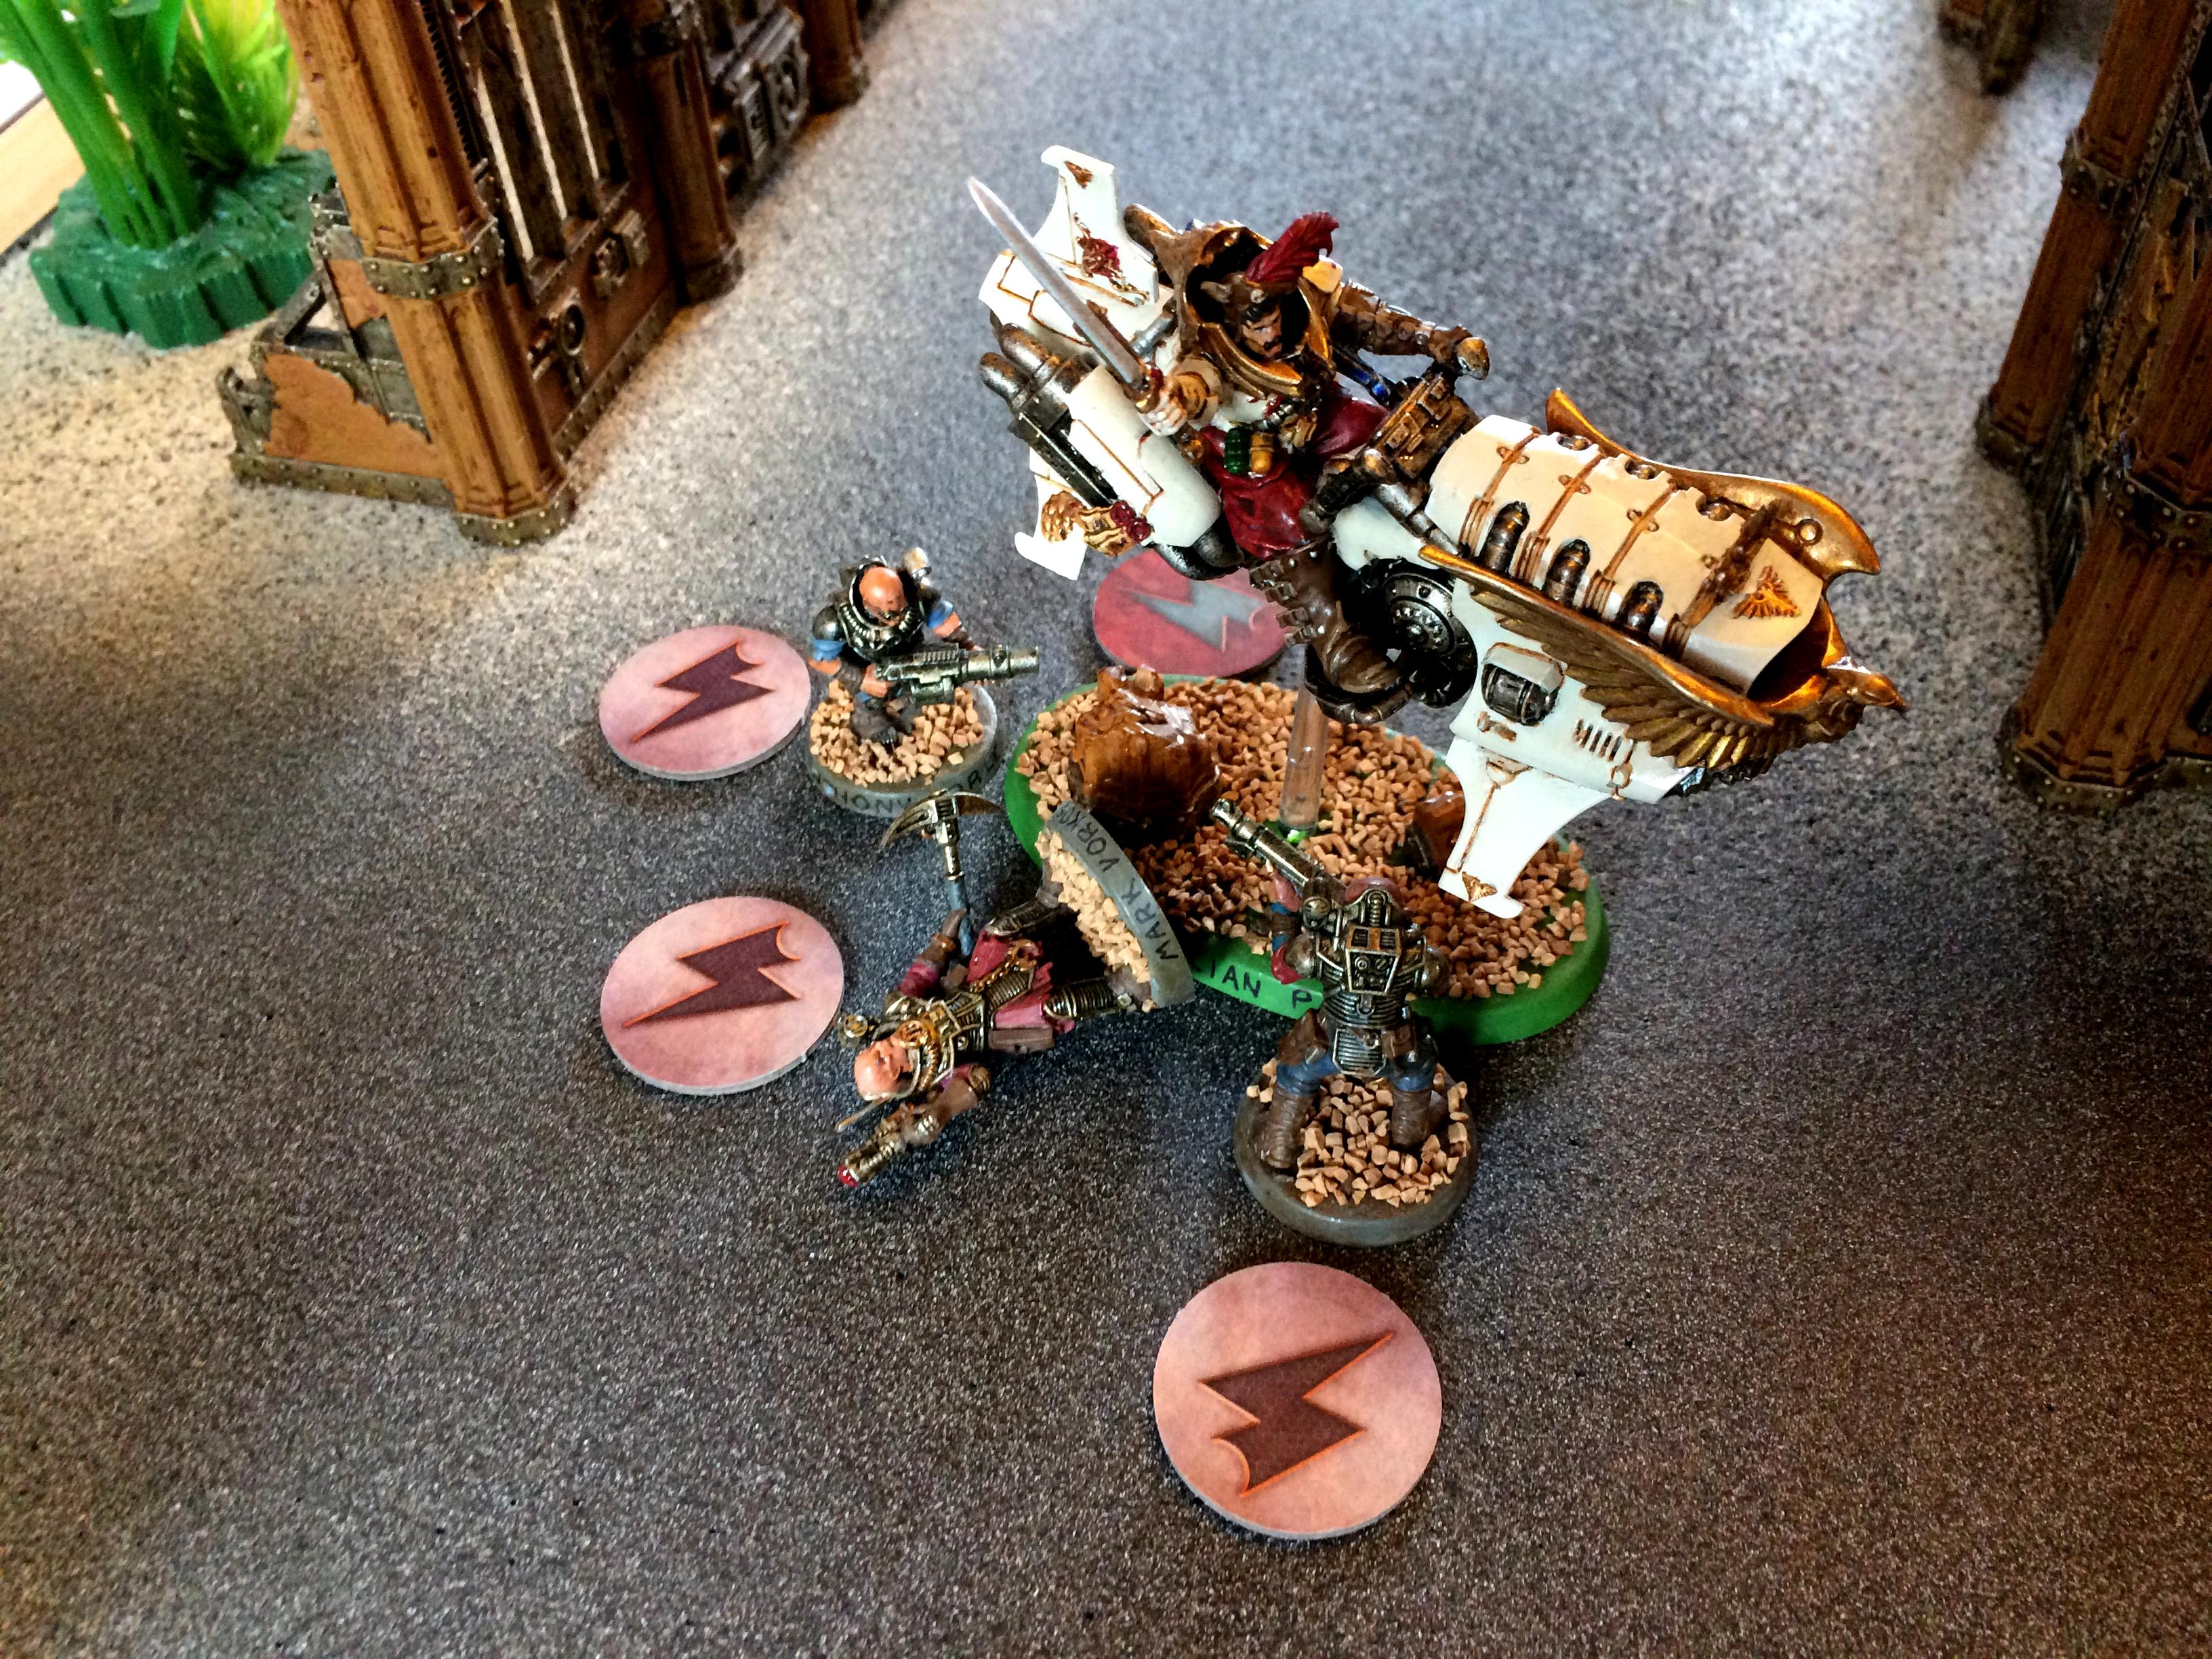 Inquisitor Parris slays the leader of the neophytes